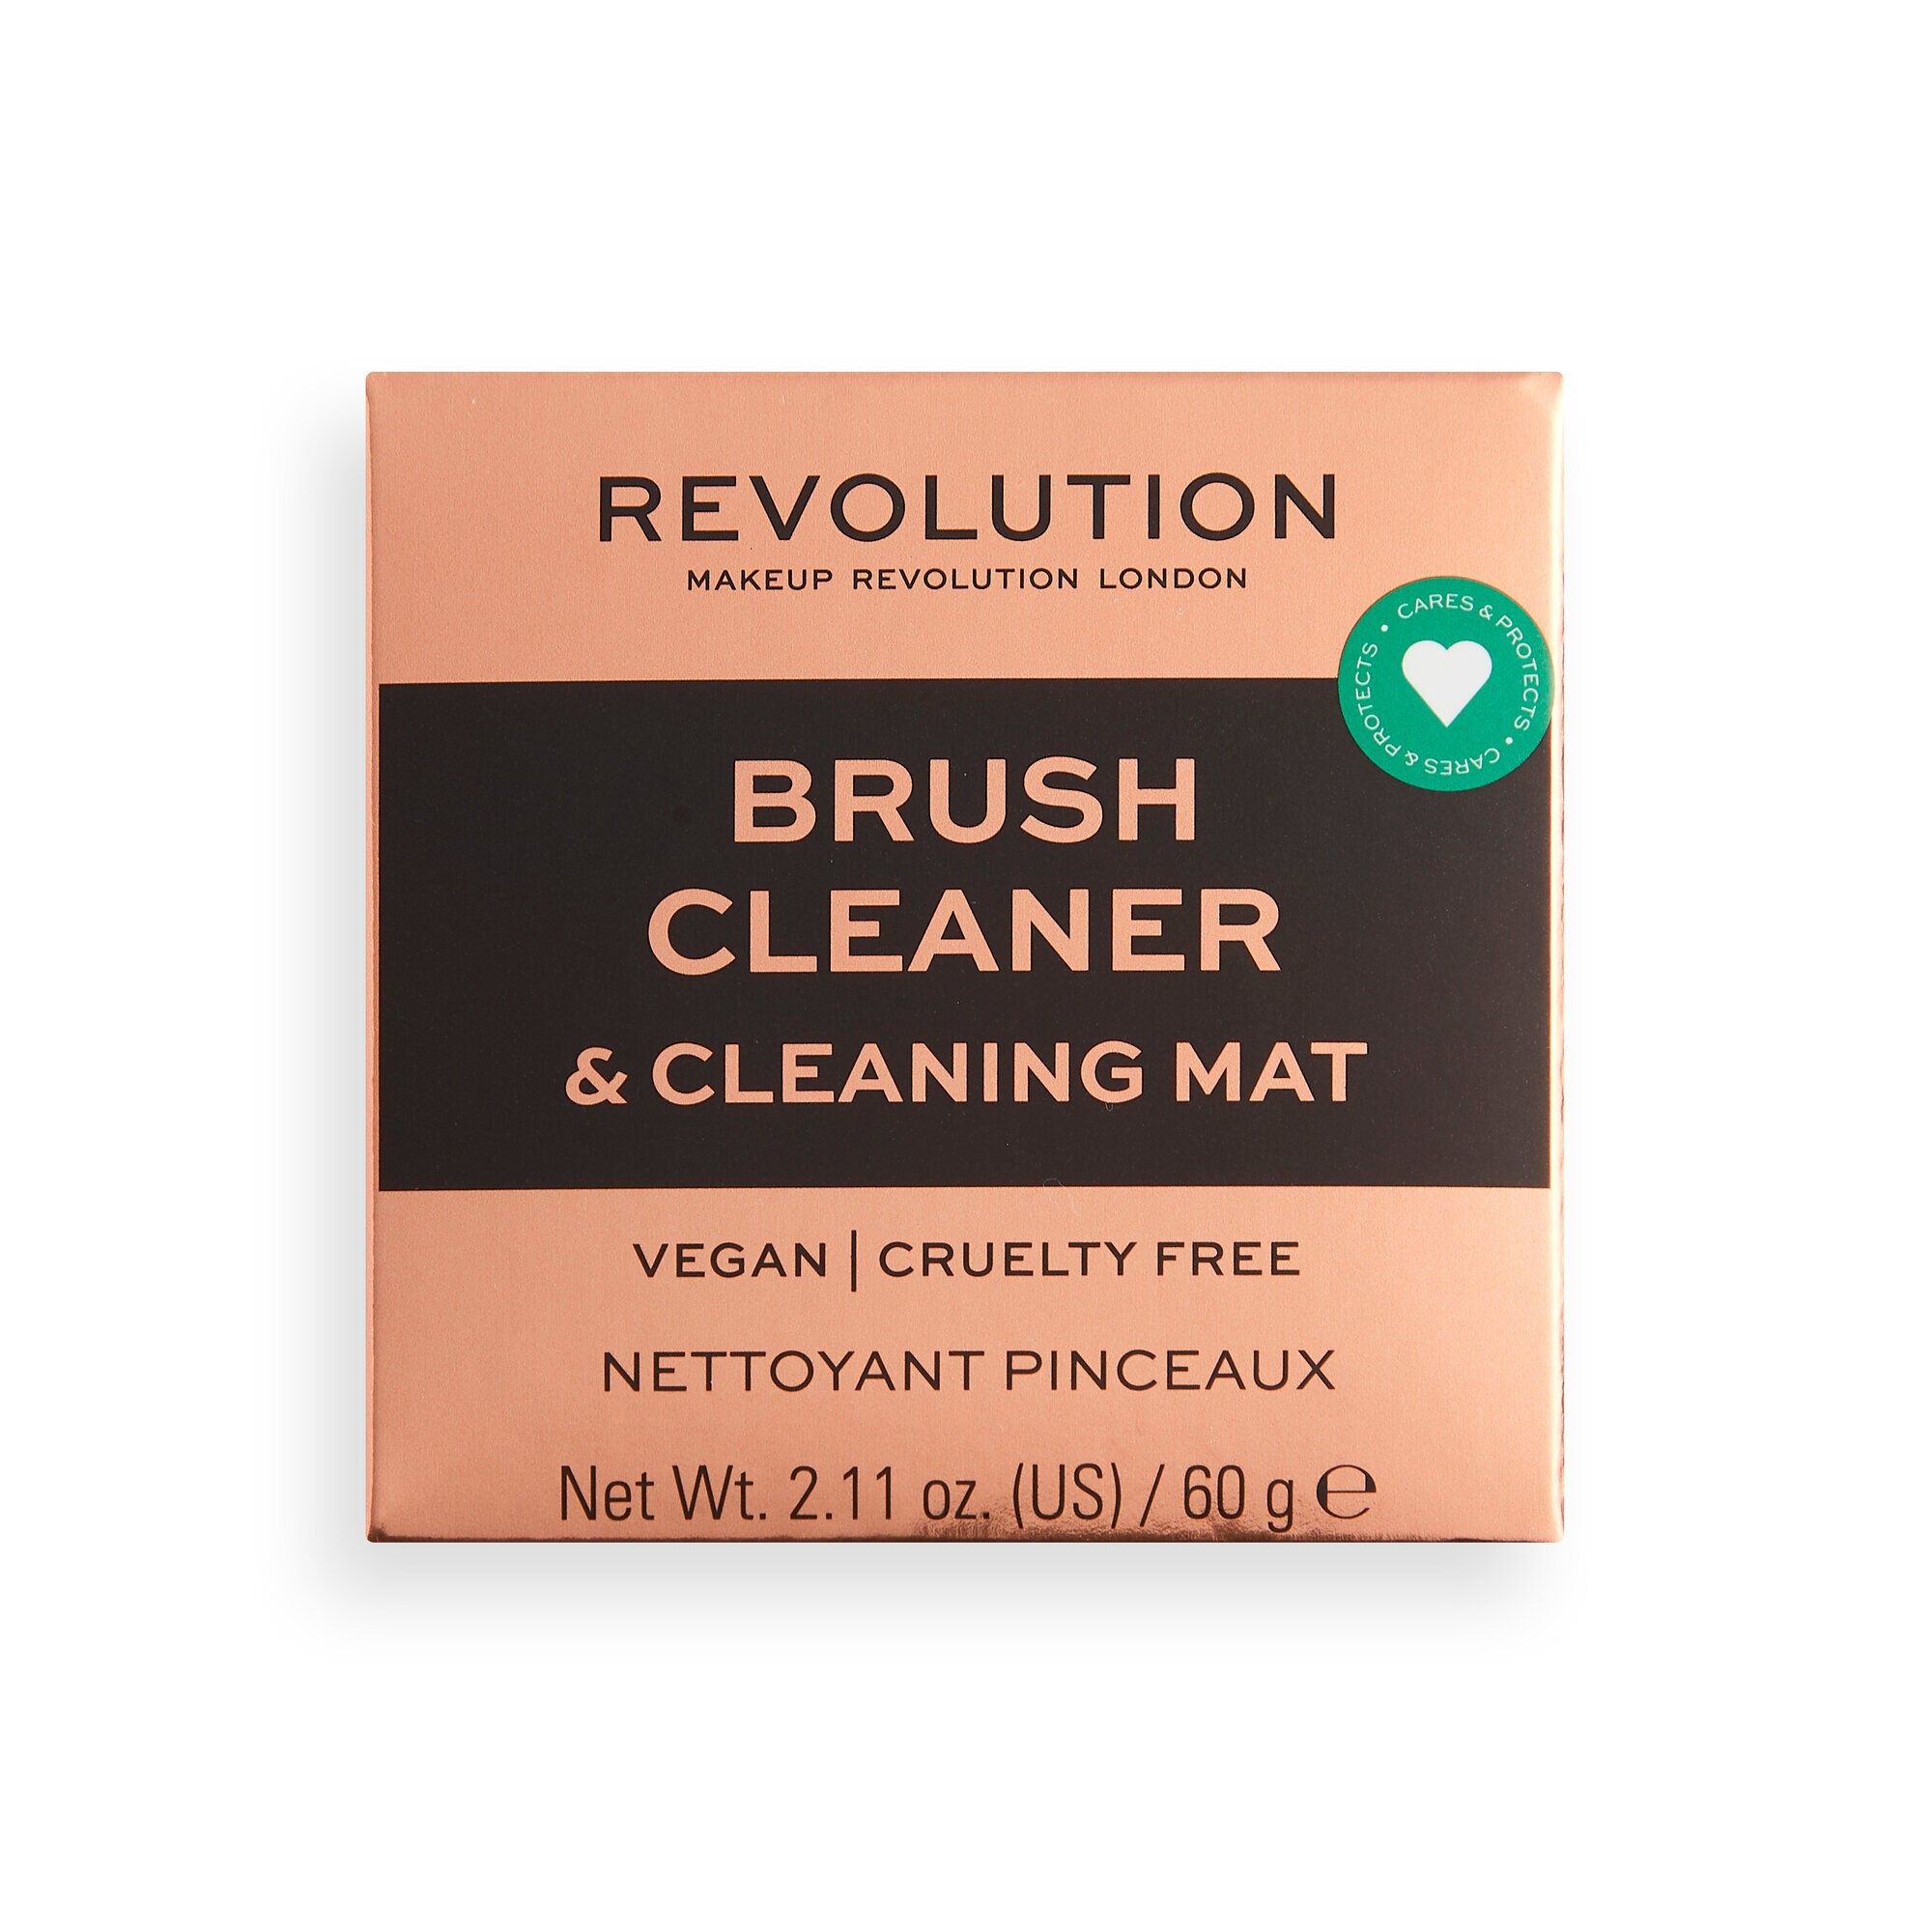 Brush Cleaner & Cleaning Mat